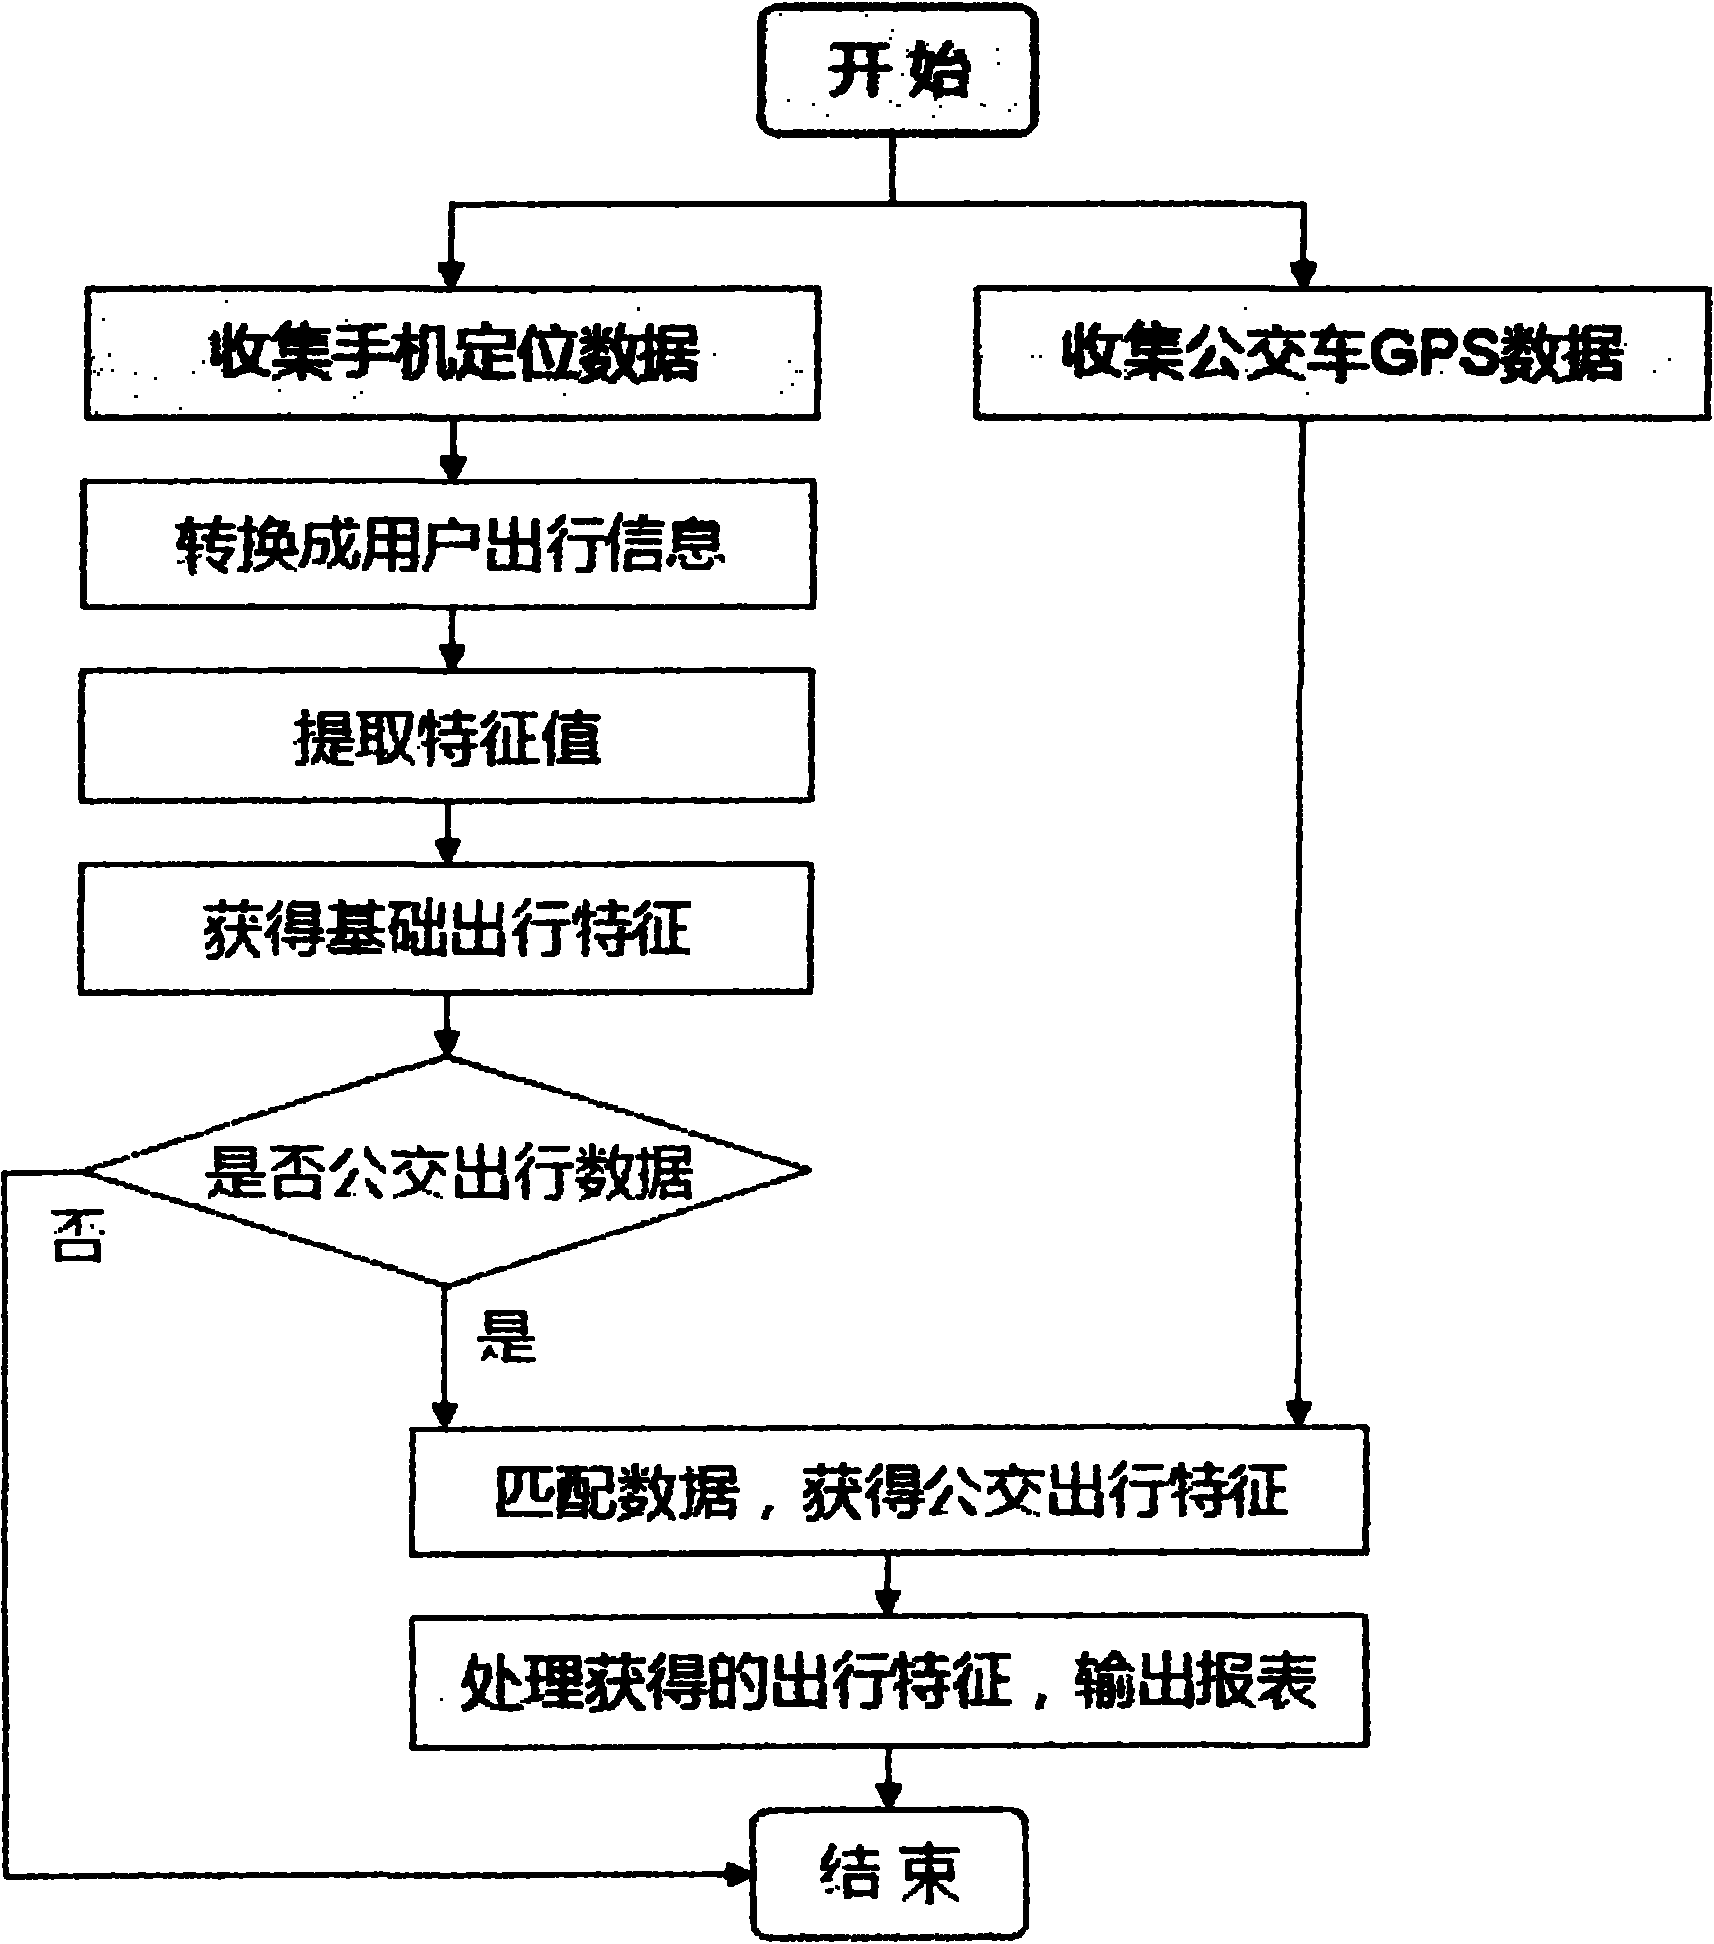 Method for bus origin-destination (OD) investigation by using mobile phone base station data and operating vehicle global position system (GPS) data